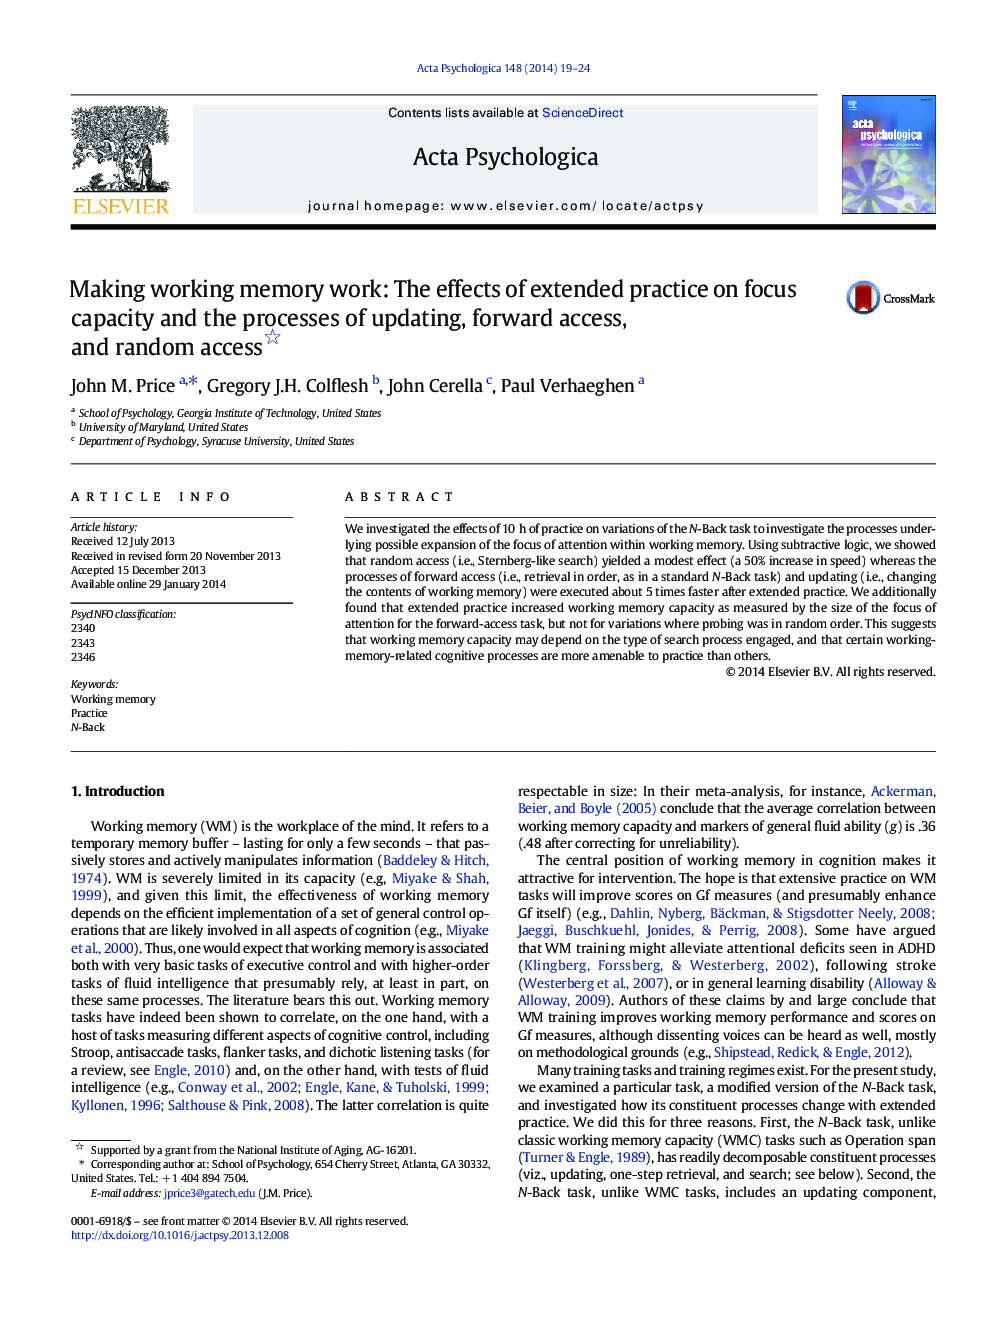 Making working memory work: The effects of extended practice on focus capacity and the processes of updating, forward access, and random access